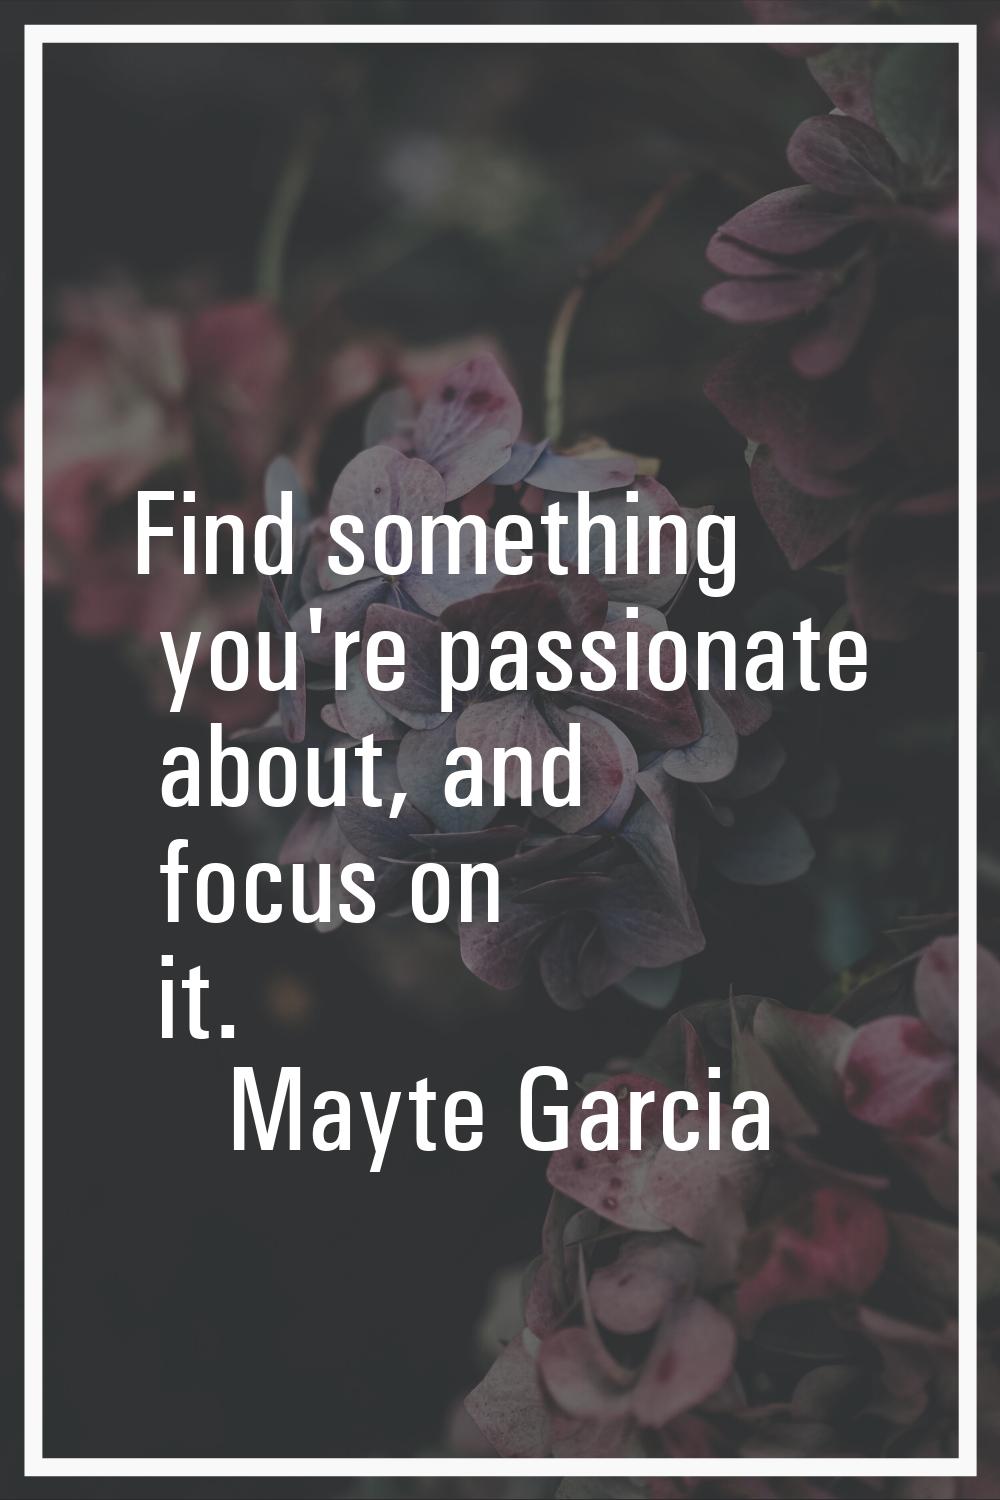 Find something you're passionate about, and focus on it.